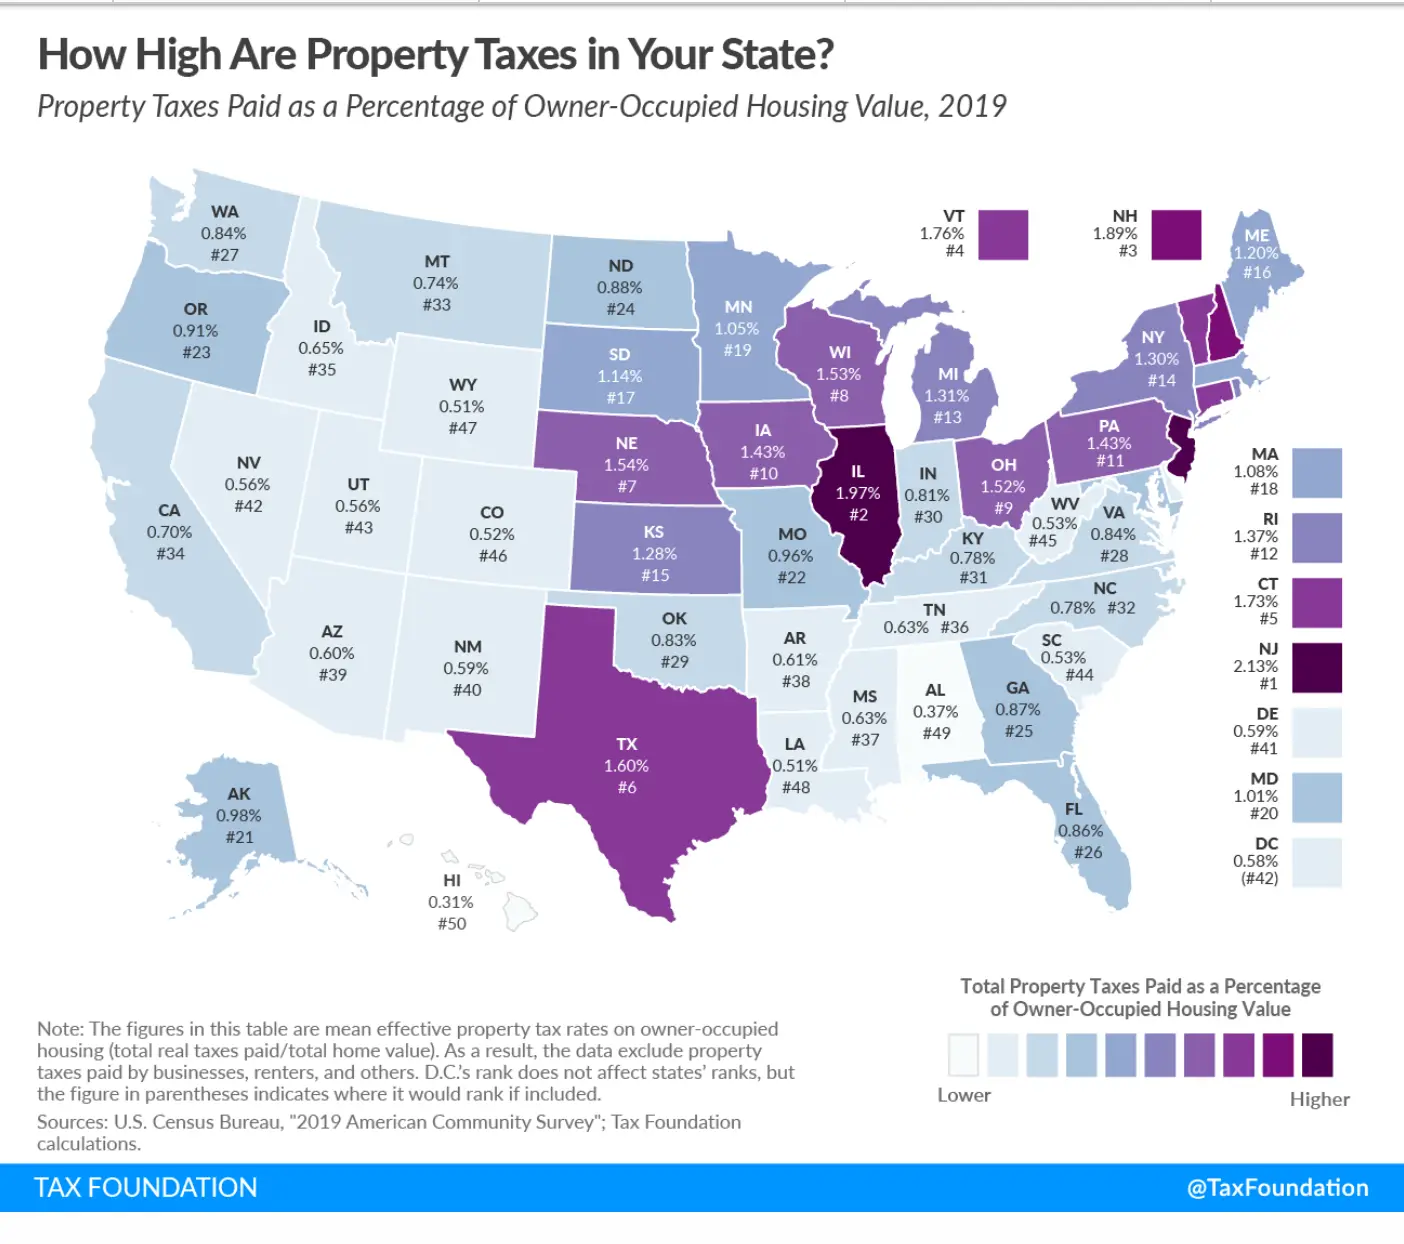 Effective property tax rates on owner